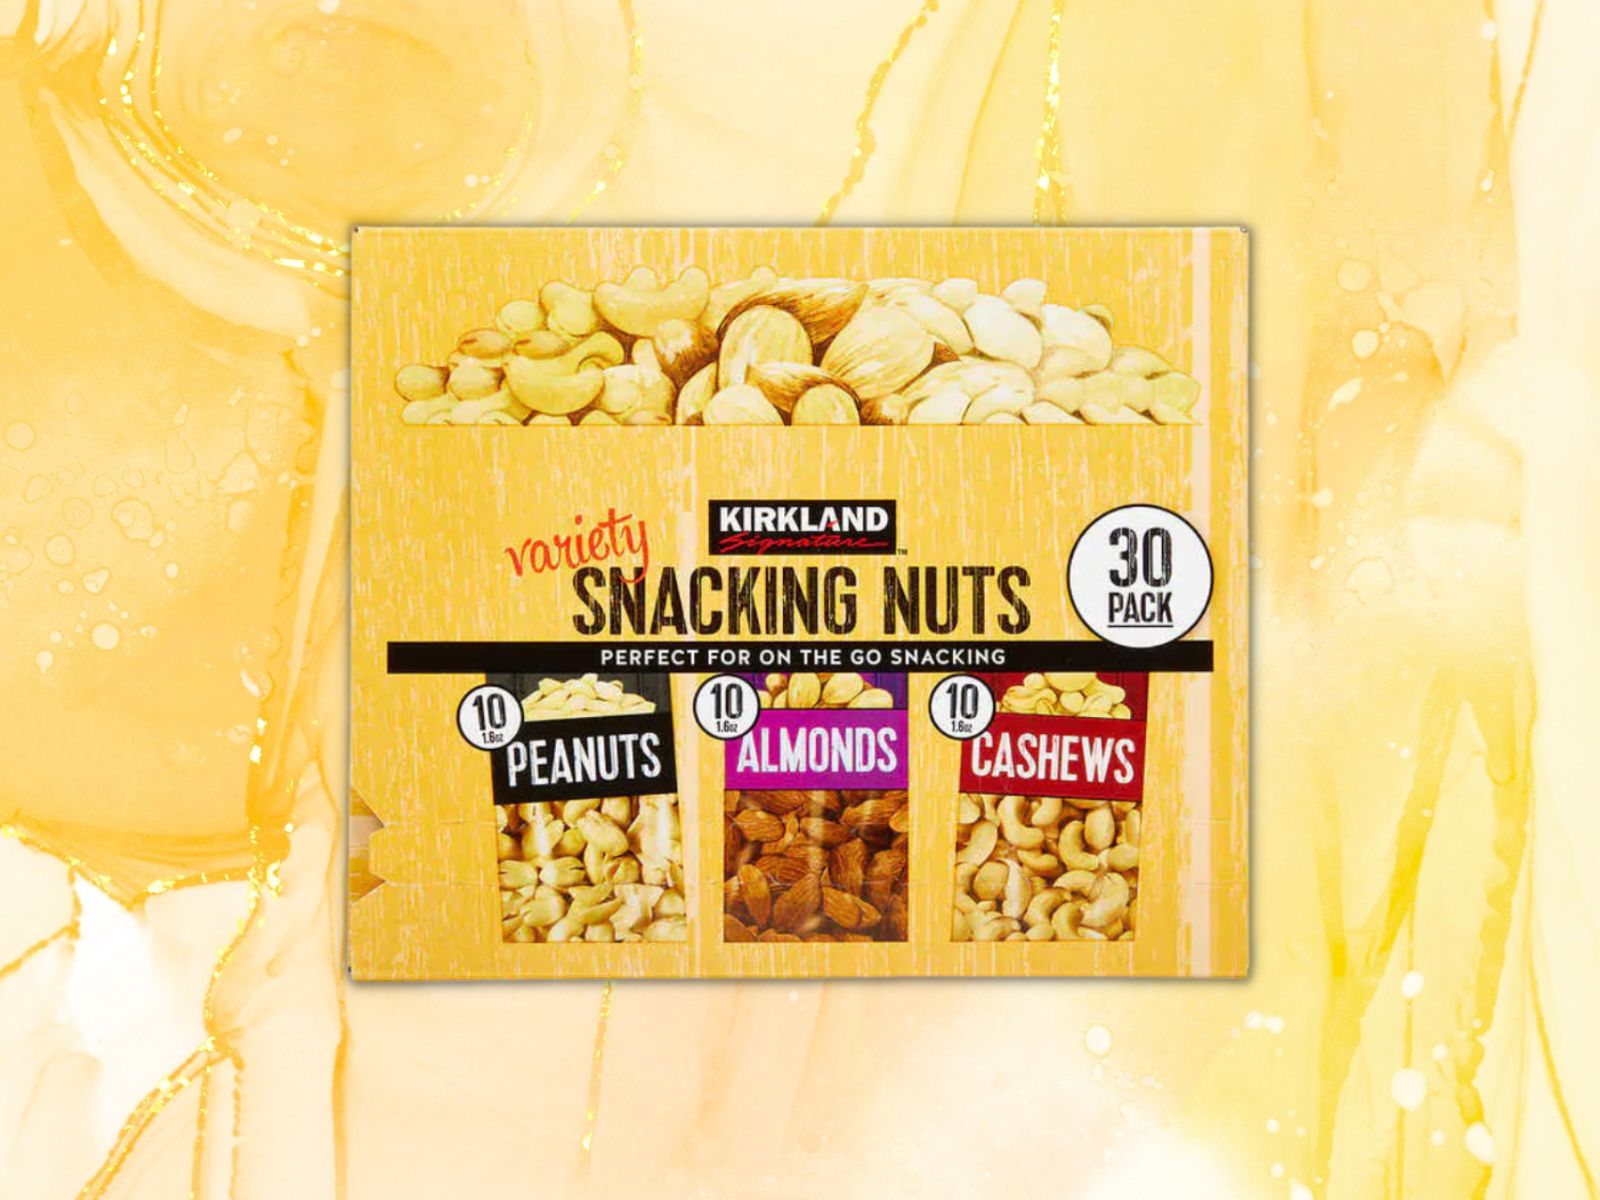 kirkland snacking nuts as a costco weight loss snack